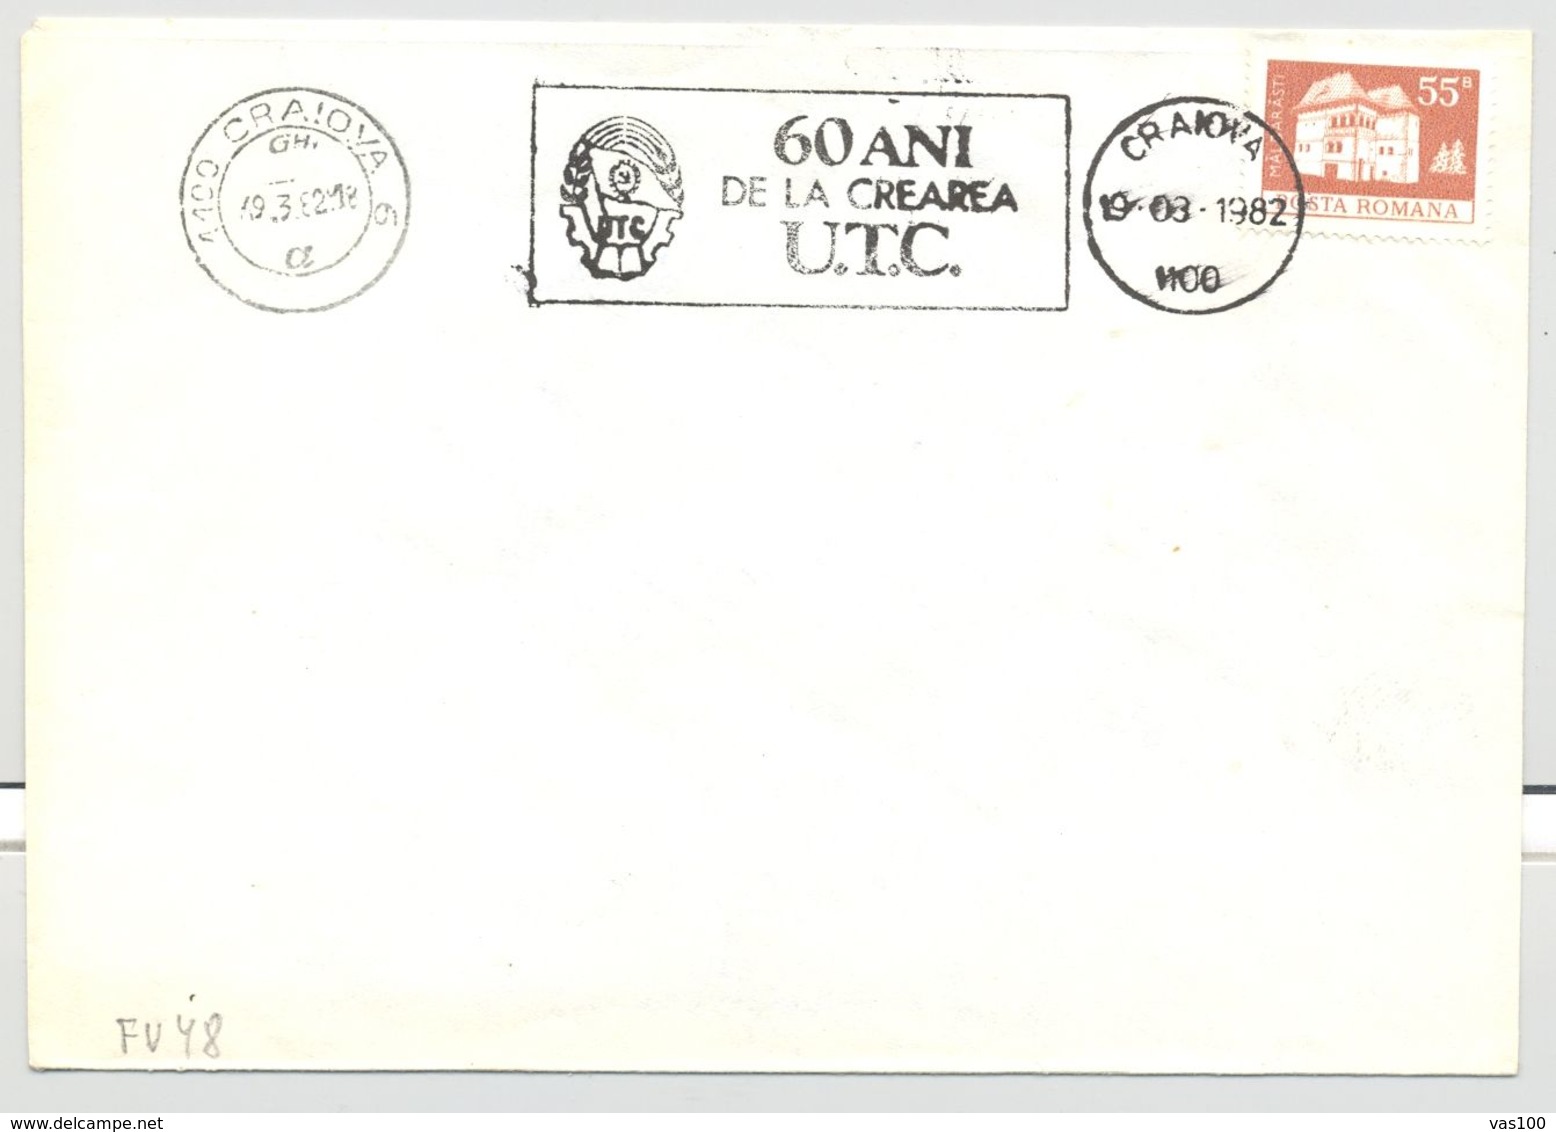 YOUTH COMMUNIST ORGANIZATION, SPECIAL POSTMARK, MANSION STAMP ON COVER, 1982, ROMANIA - Covers & Documents